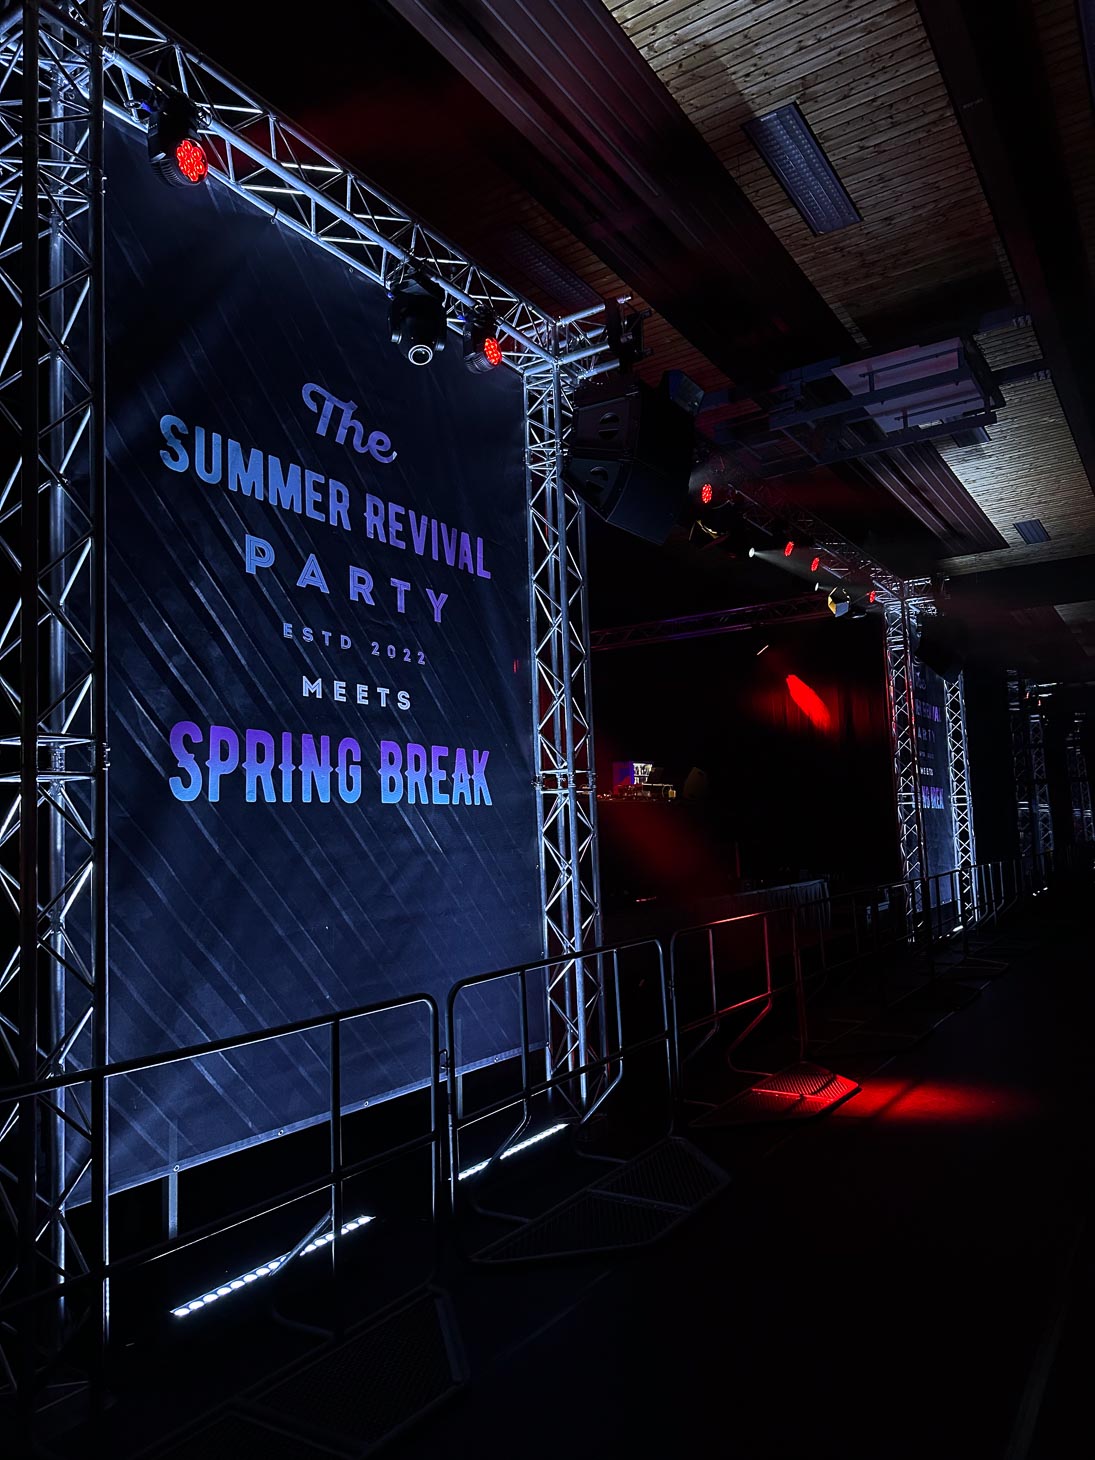 Summer Revival Party